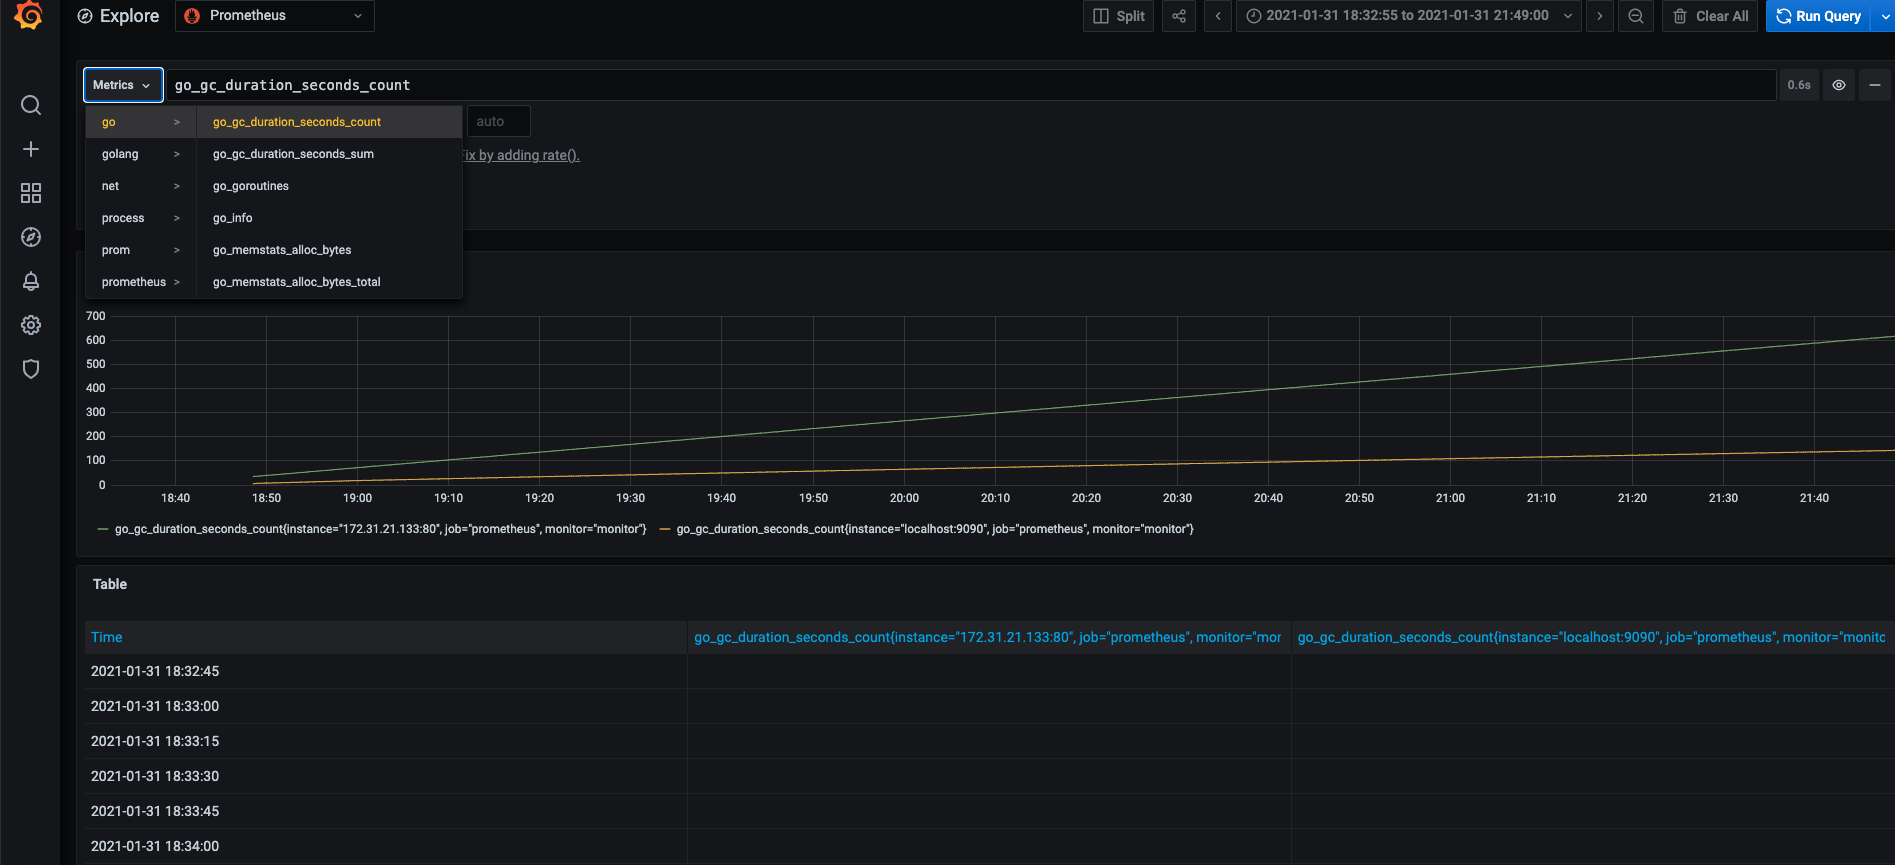 View collected metrics on AMP in Grafana dashboard